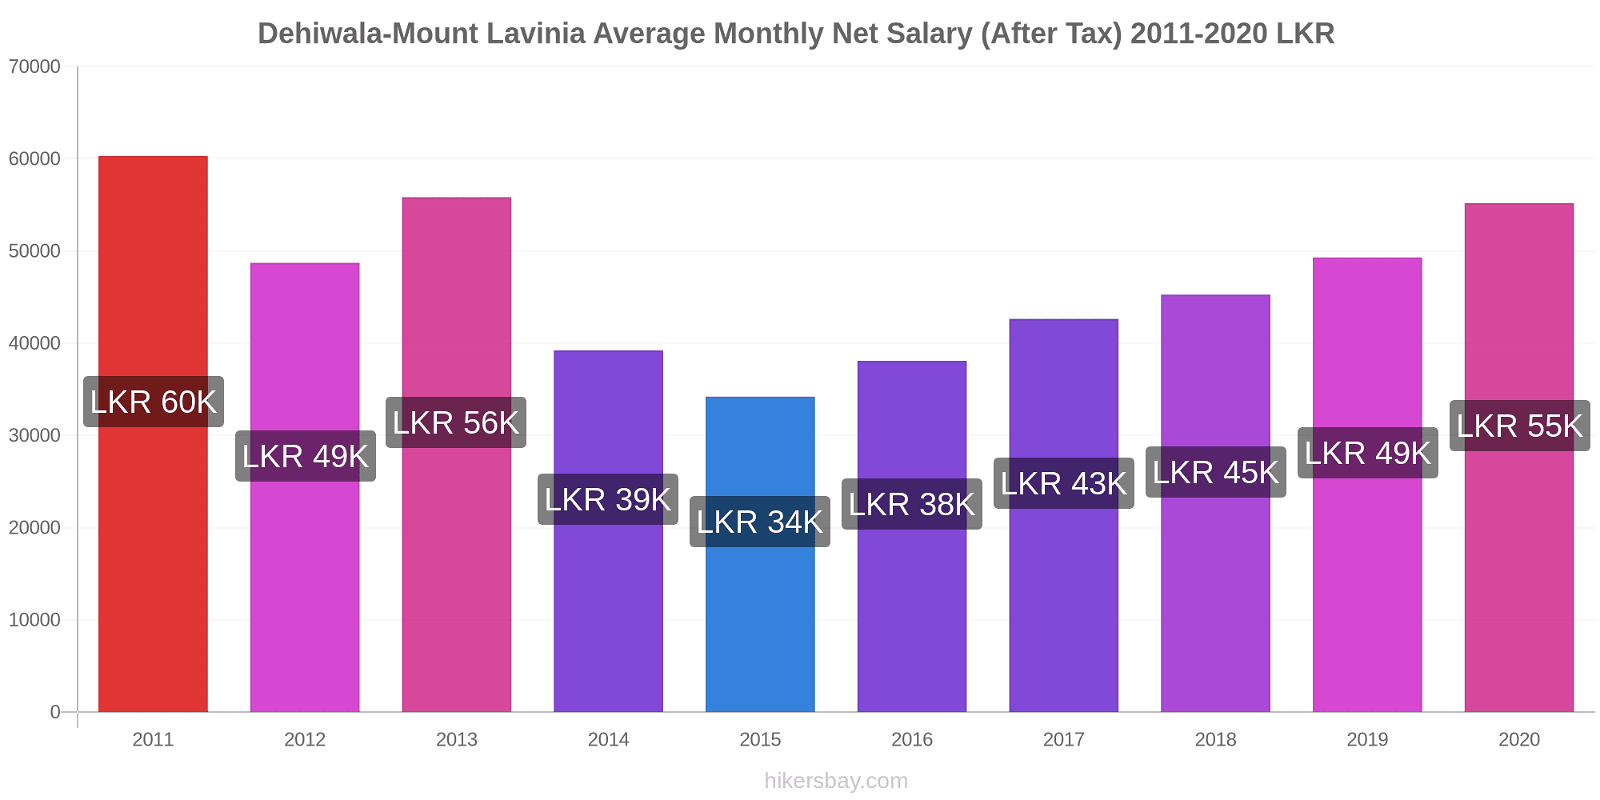 Dehiwala-Mount Lavinia price changes Average Monthly Net Salary (After Tax) hikersbay.com